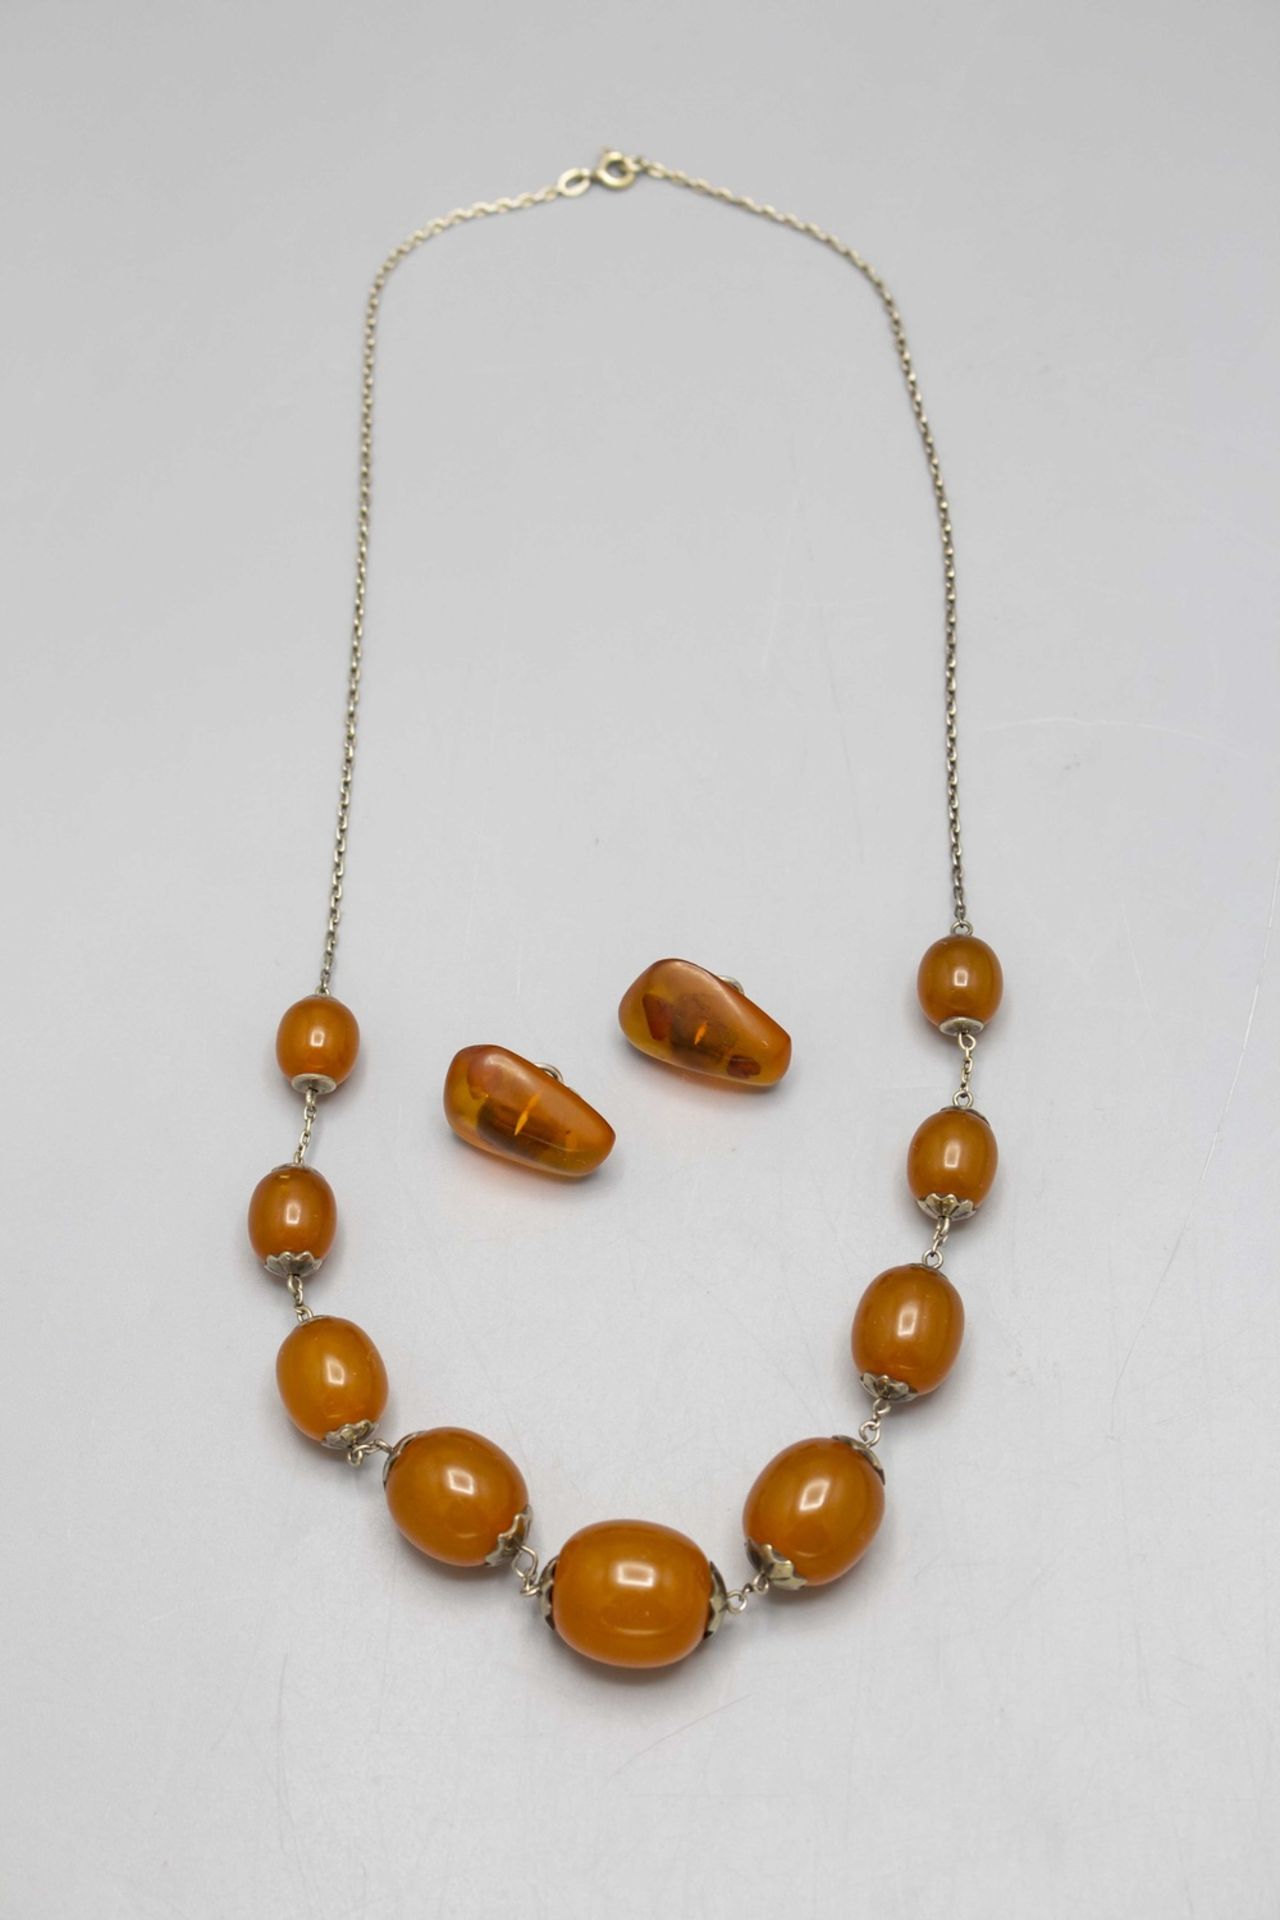 Bernsteinkette mit Ohrclips / An amber neclace with earclips